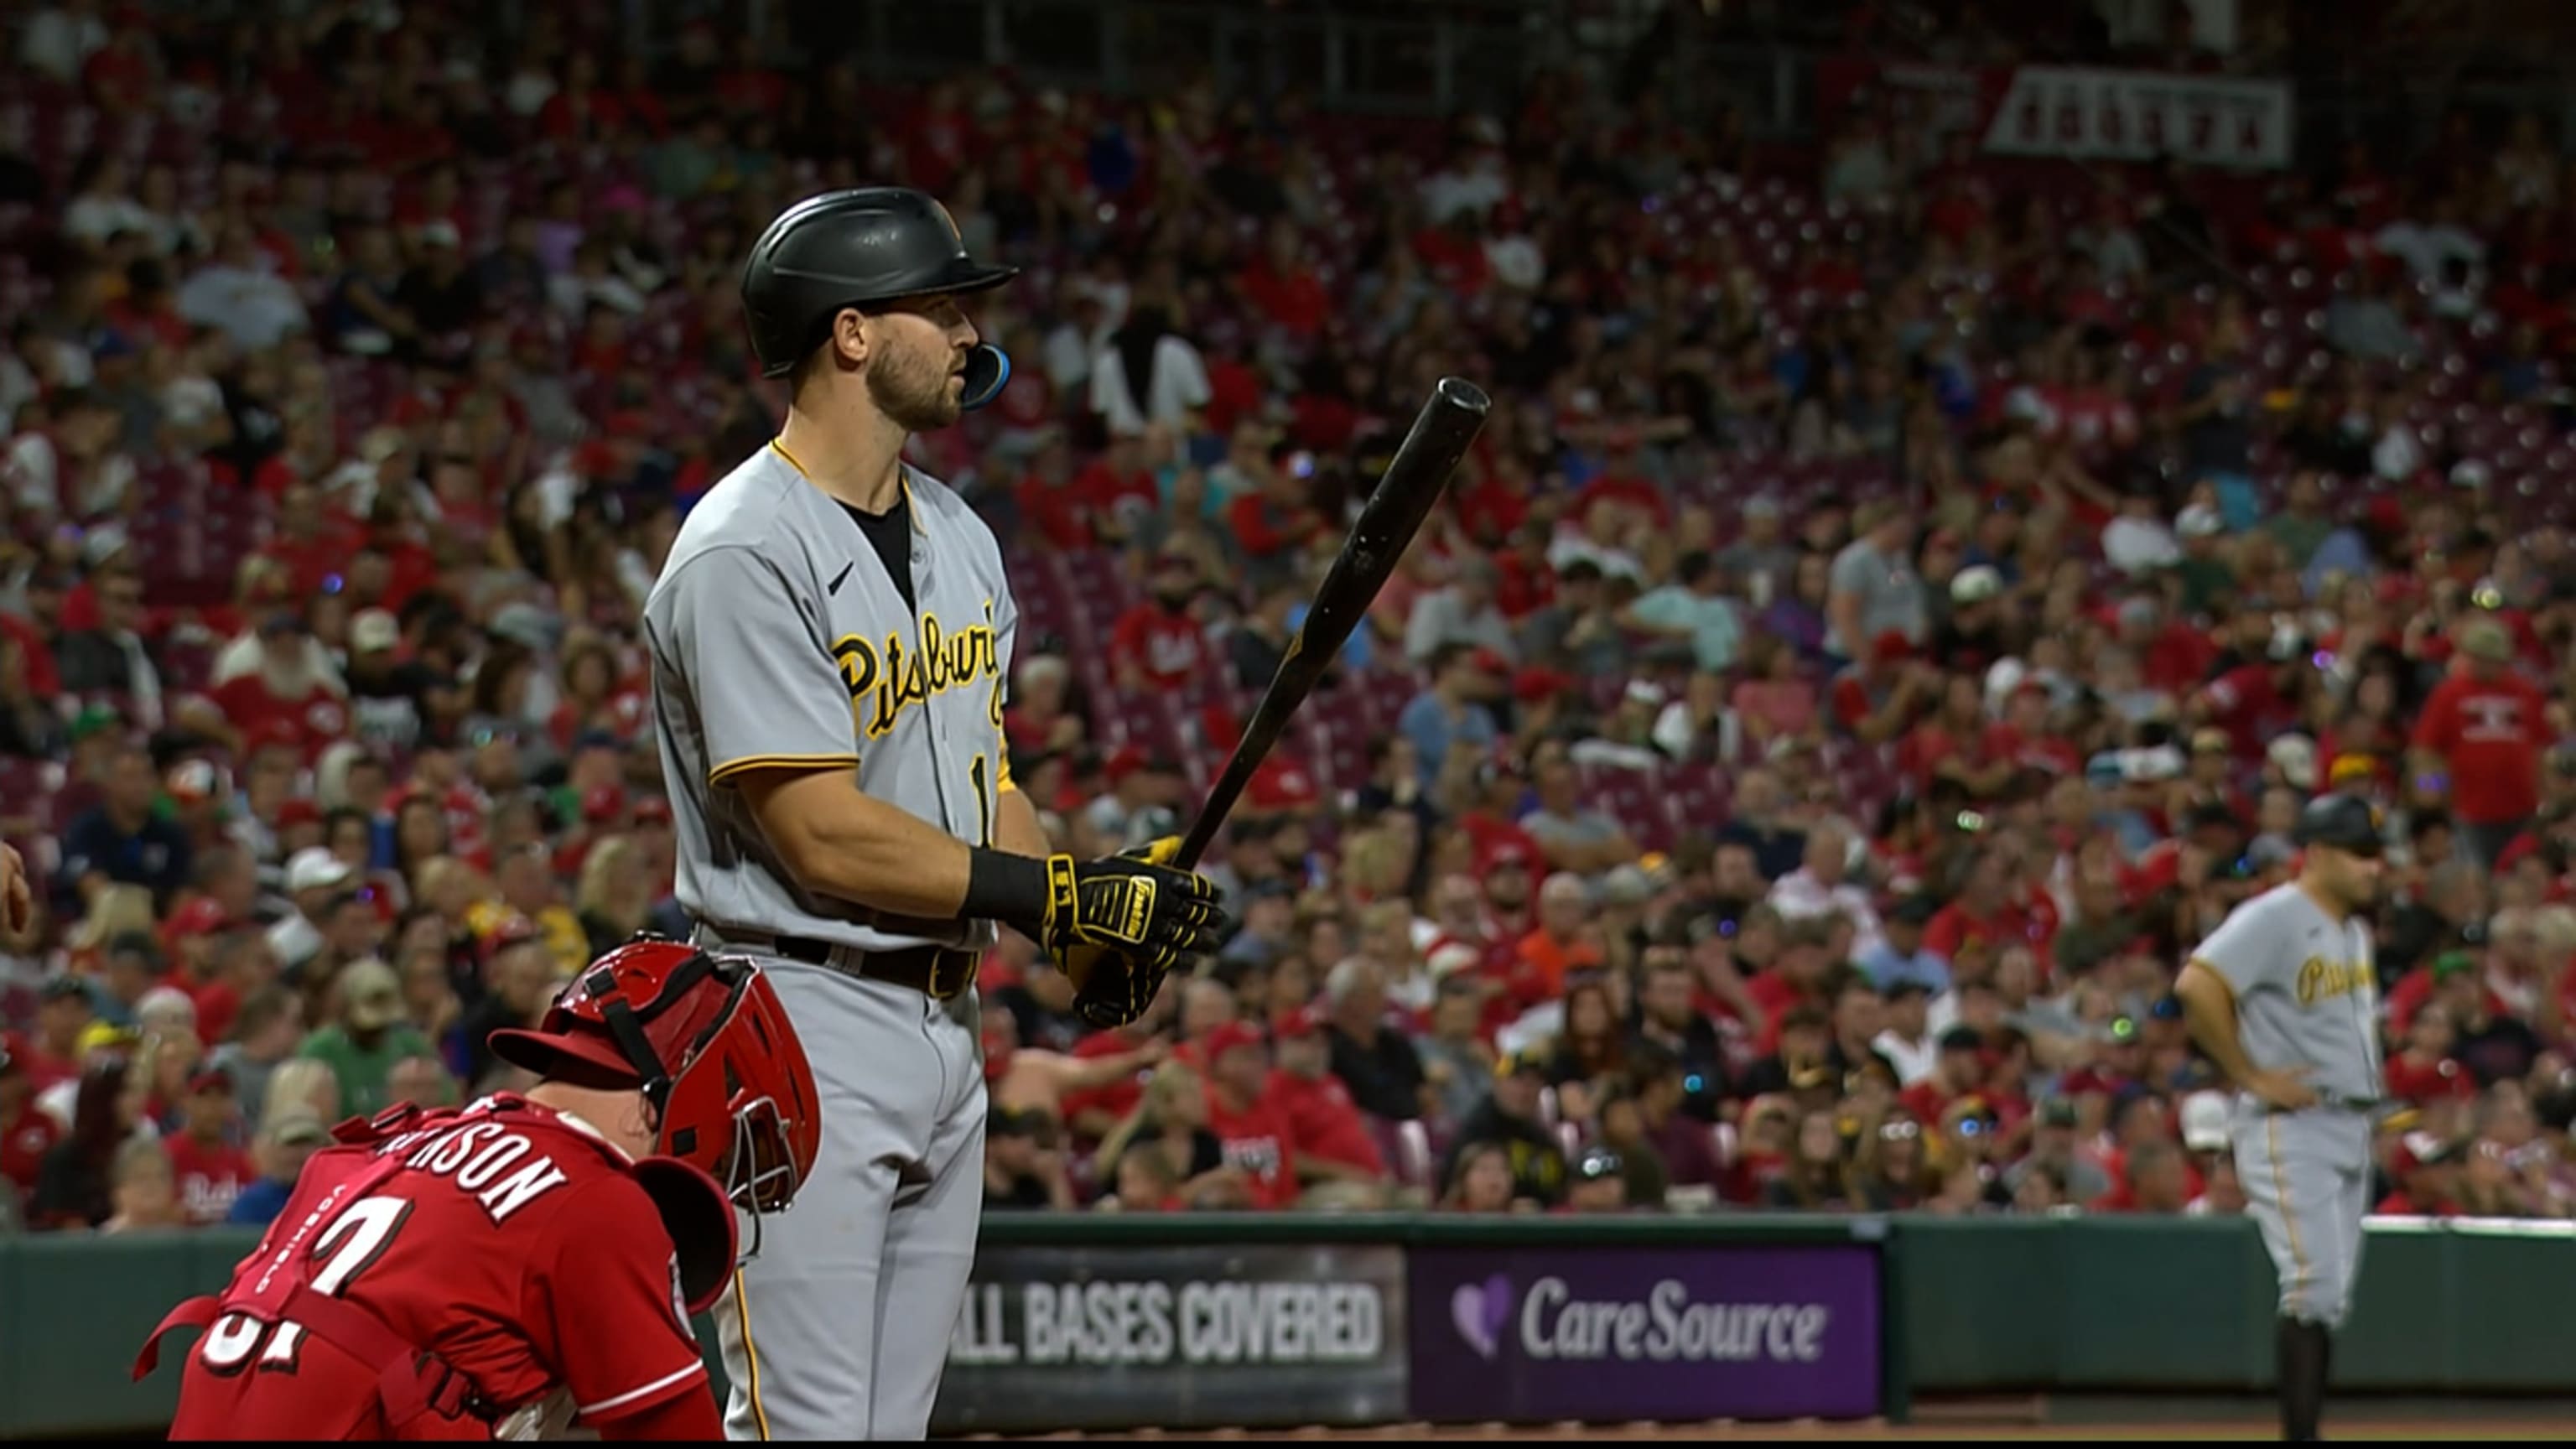 HISTORY! Pirates Come Back From 9-0 to Beat Reds 13-12